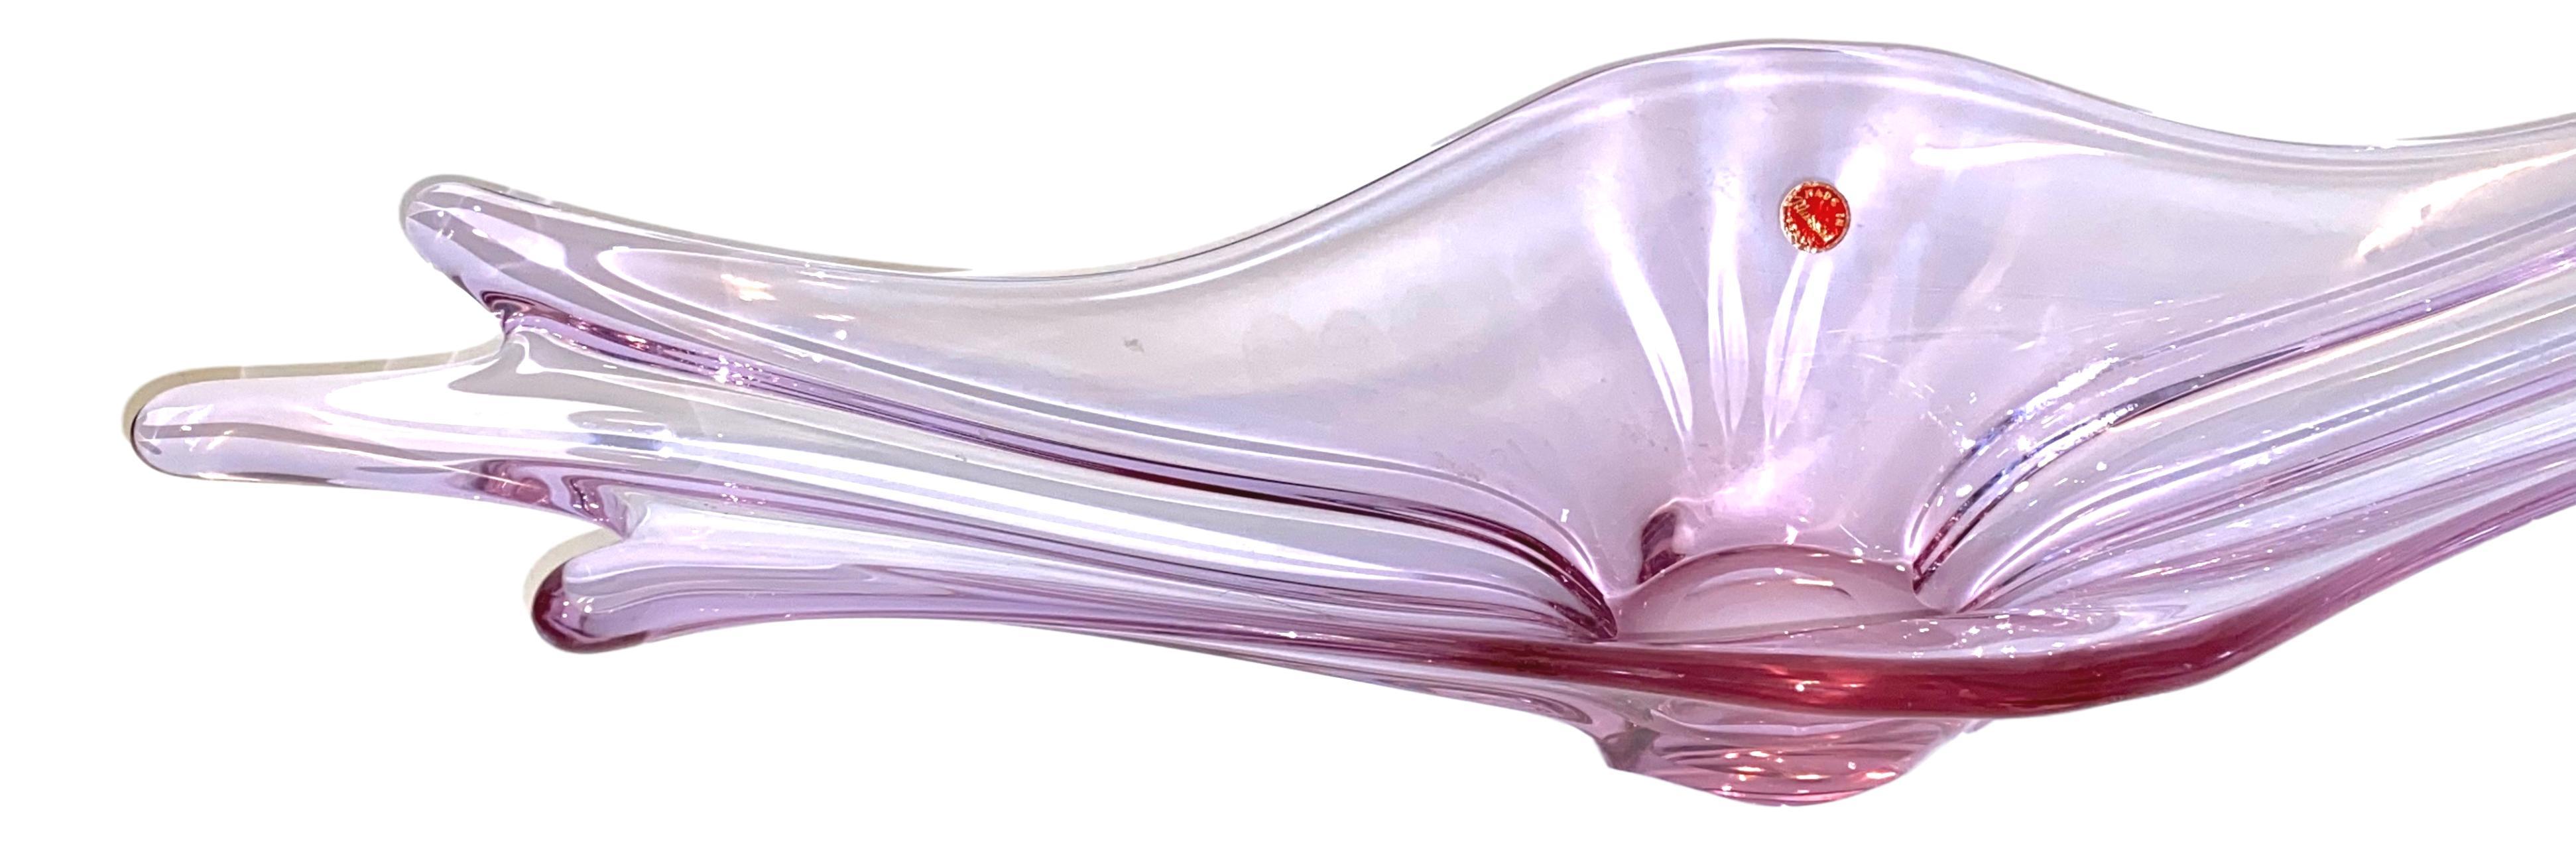 An amazing Venetian Murano glass bowl in a nice pink and clear color. A highly decorative piece useful as centre piece or catchall, candy bowl or fruit bowl, Italy, 1970s.